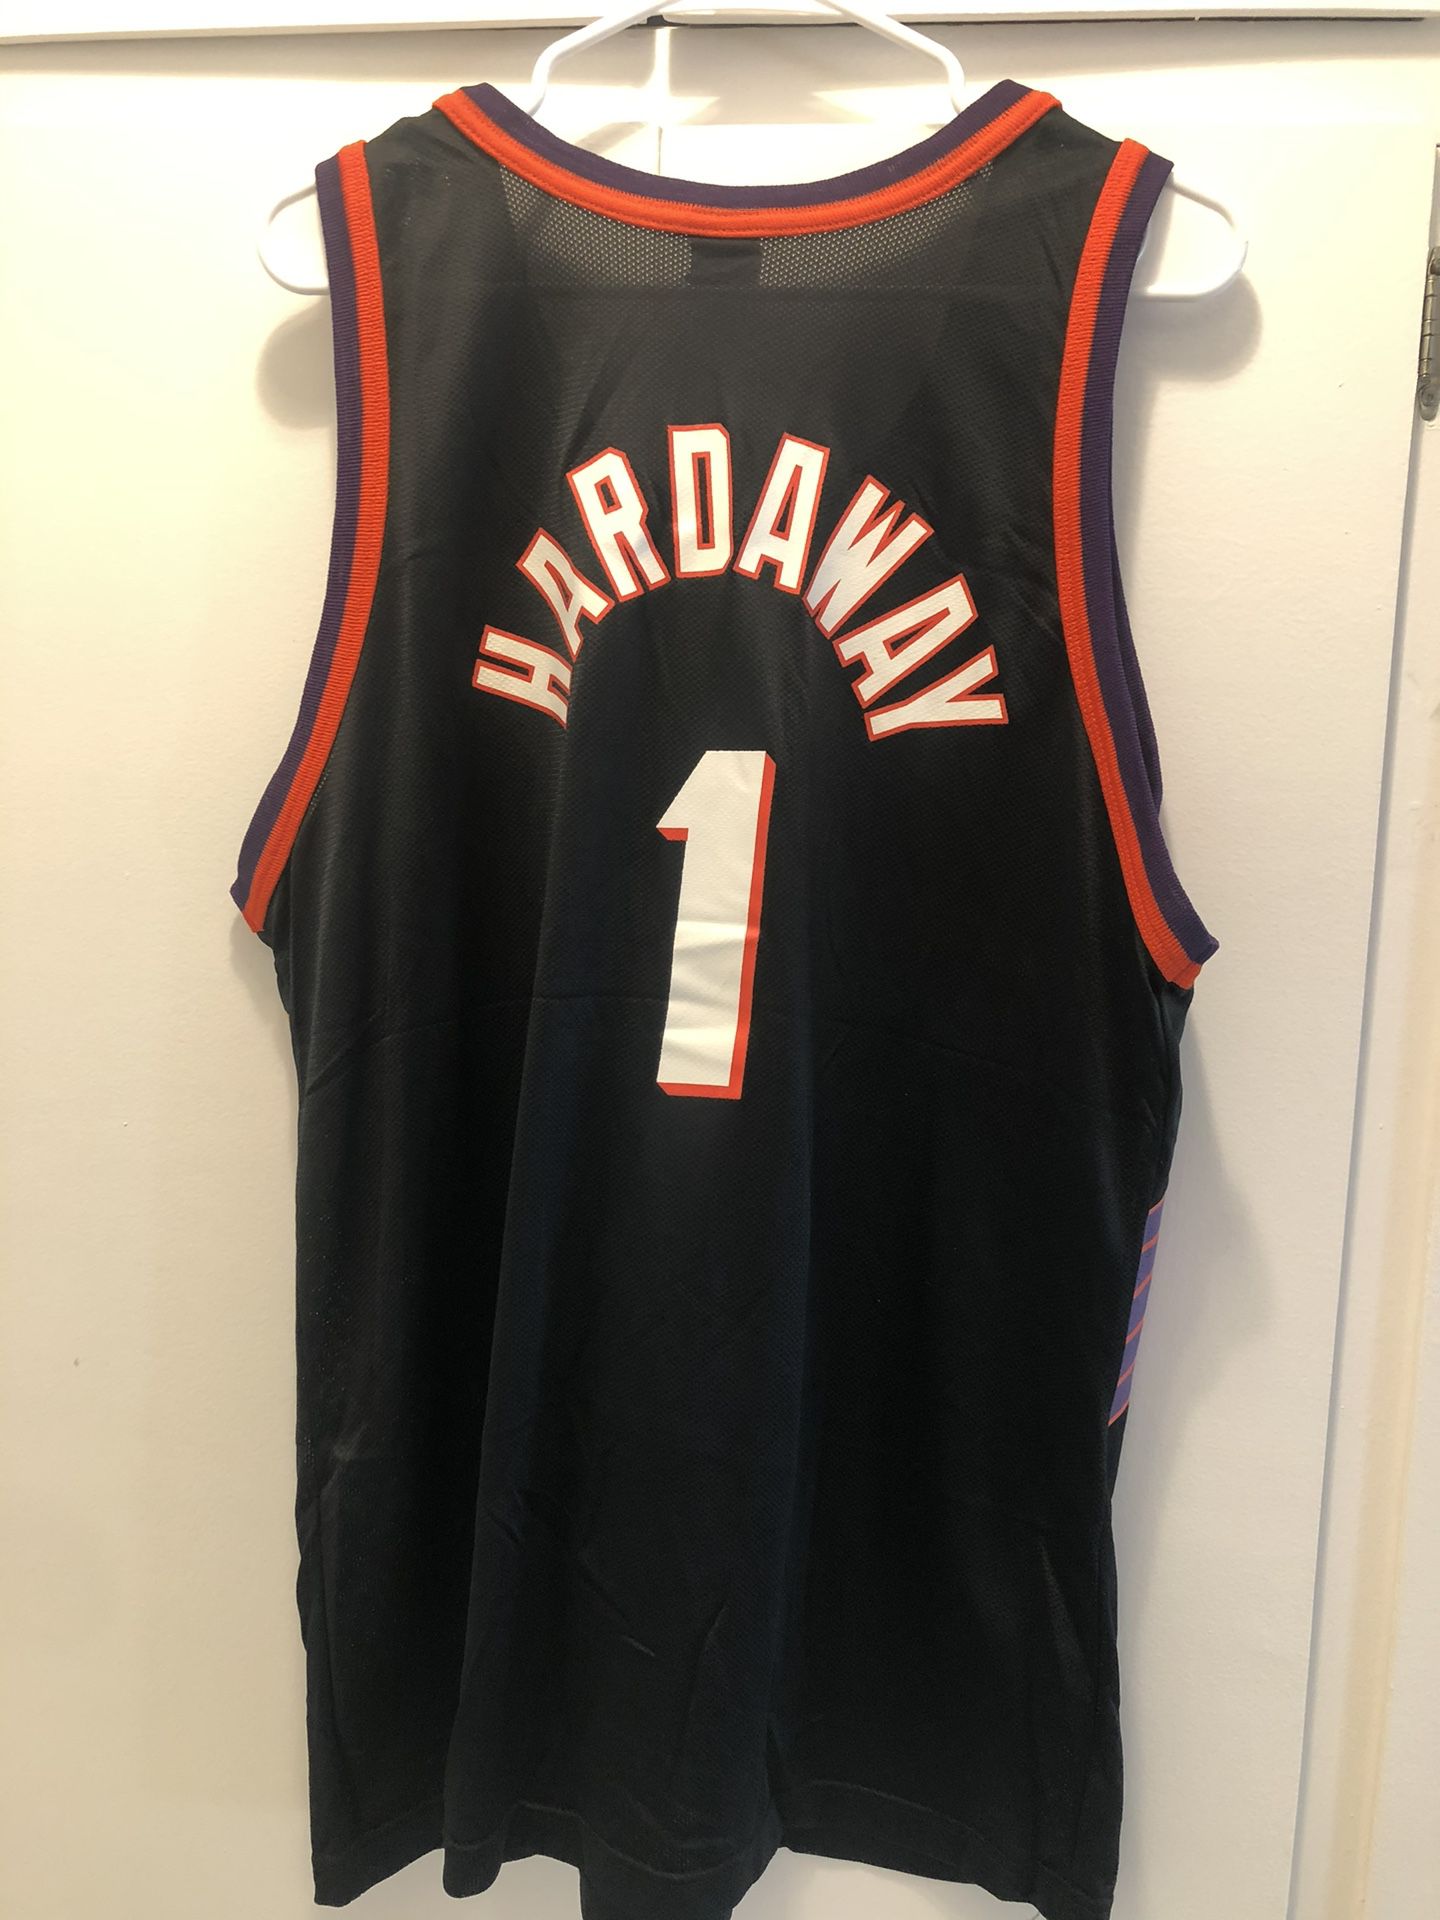 Vintage 1999 Anfernee Penny Hardaway Phoenix Suns Champion Jersey 44 Large  Throwback for Sale in Los Angeles, CA - OfferUp